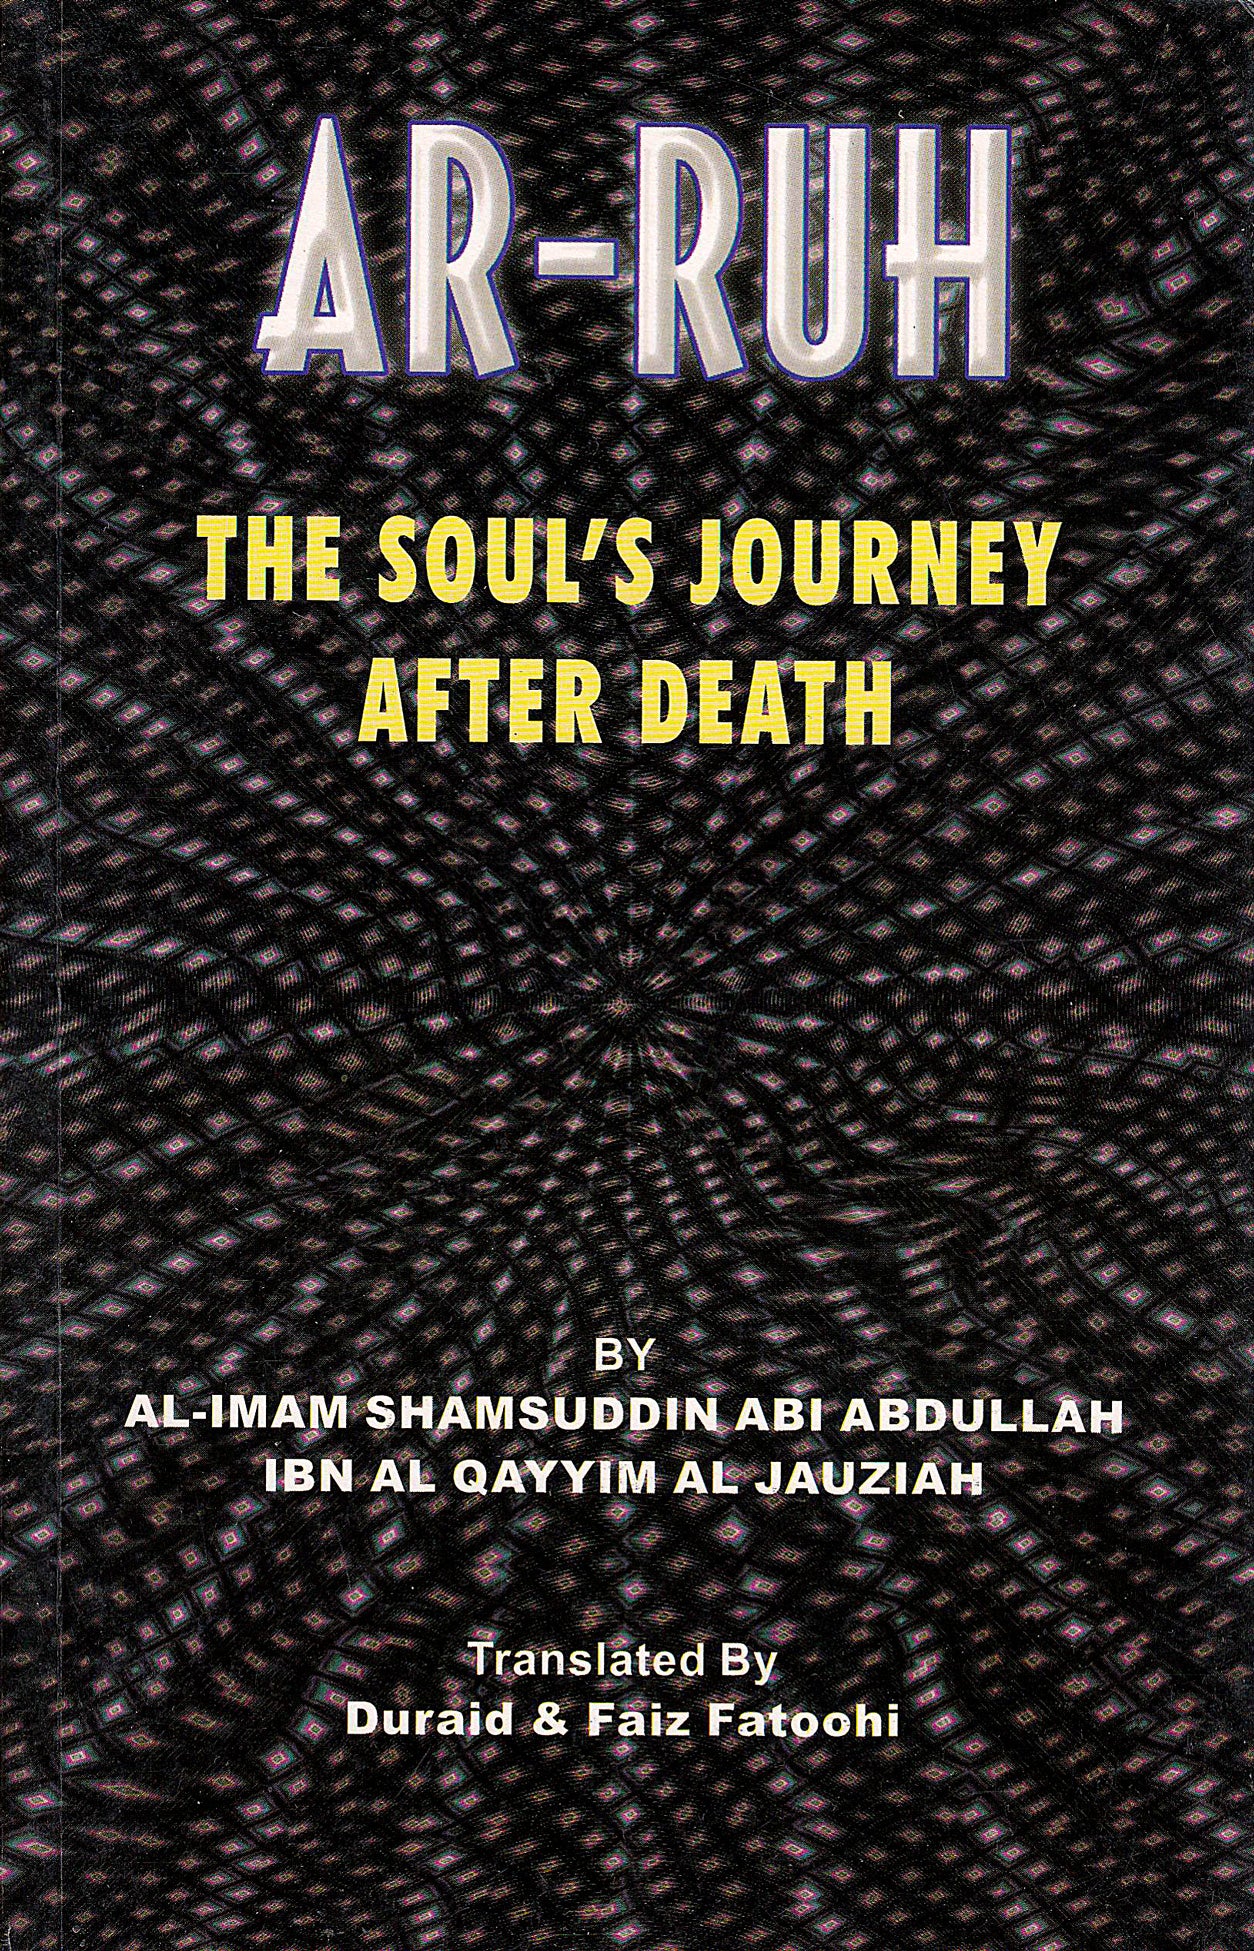 Ar-Ruh - The Soul's Journey After Death